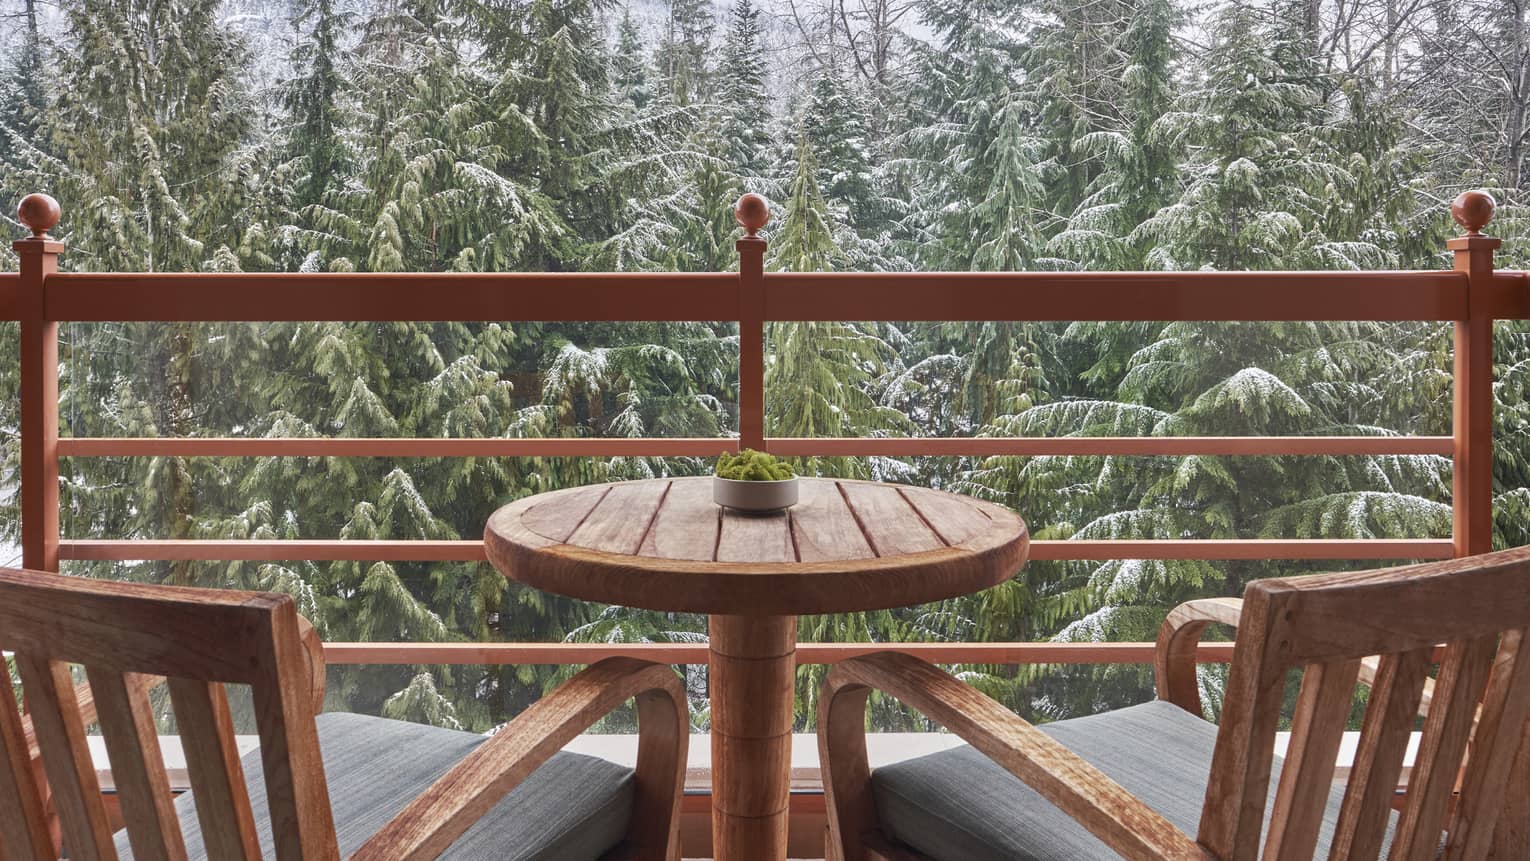 Balcony with two wooden arm chairs and a small table, overlooking the snowy forest